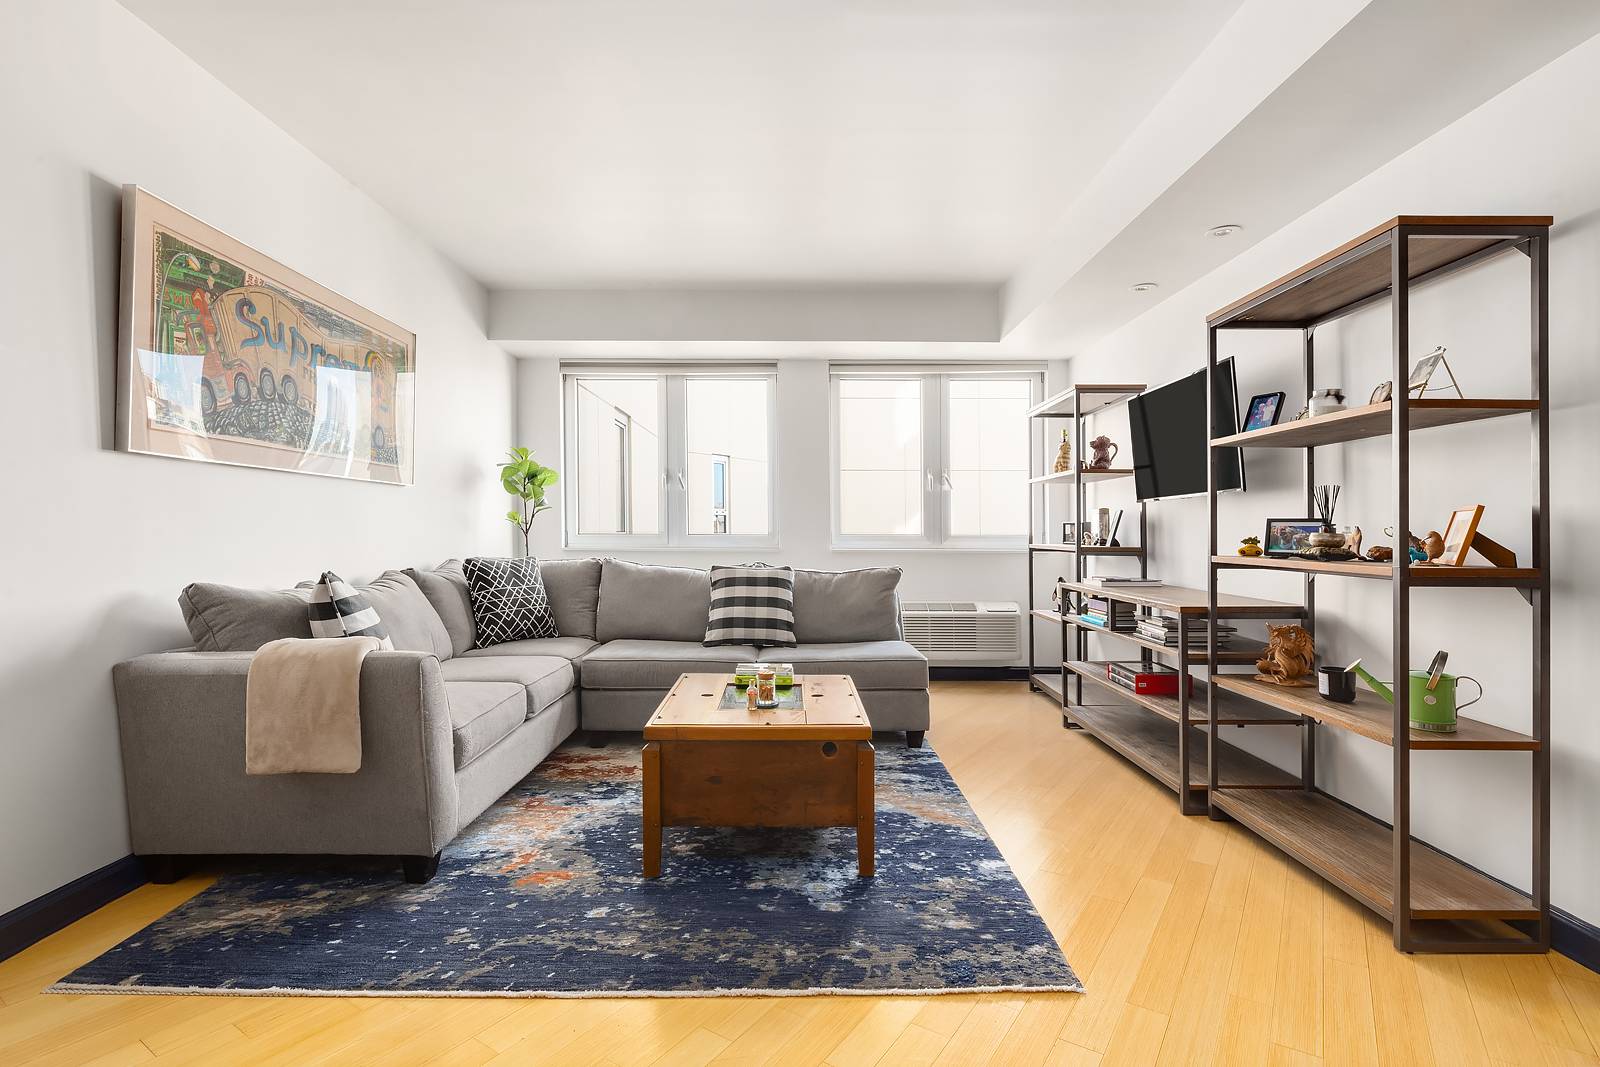 145 Park Place, 4D Nestled in Park Slope between Grand Army Plaza and Barclays Center, this uniquely spacious 1 bedroom, 1 bathroom home is an exemplar of contemporary Brooklyn living.